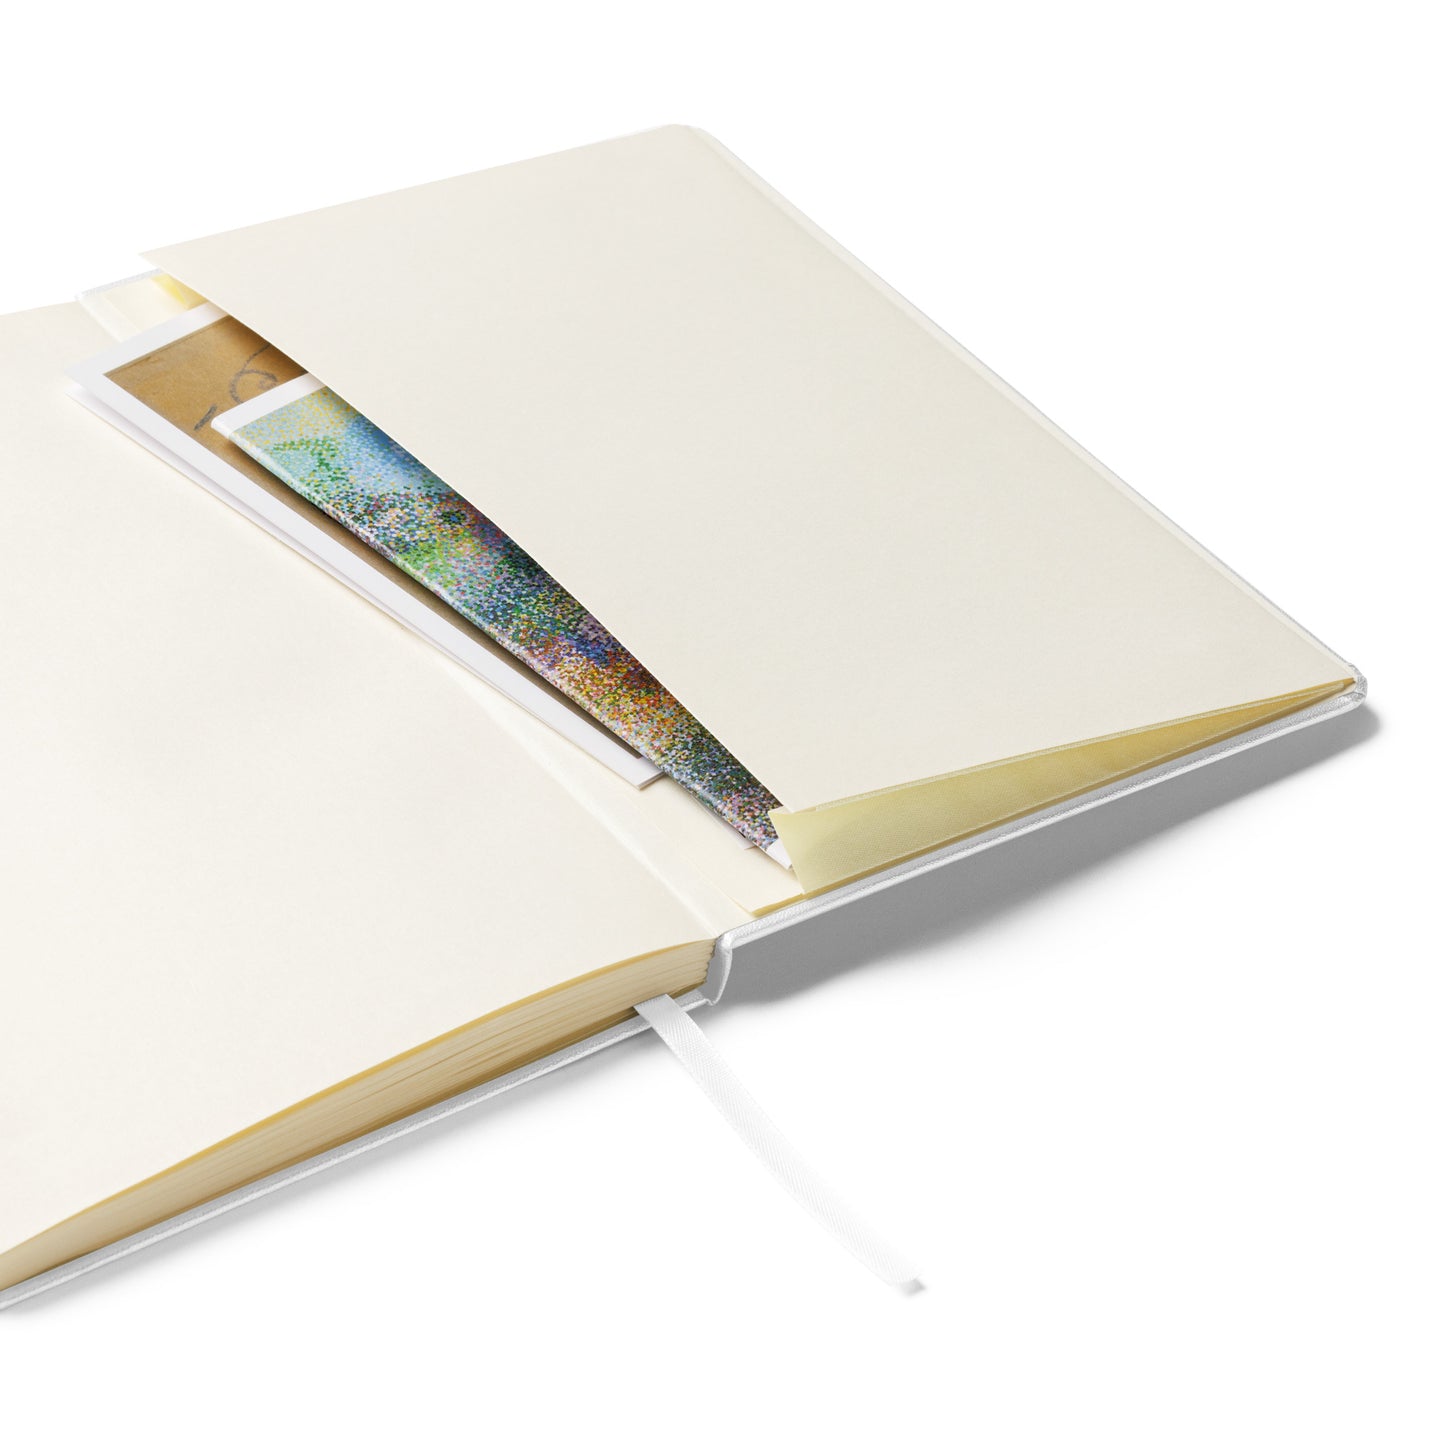 The Cat or The Plant - Hardcover bound notebook